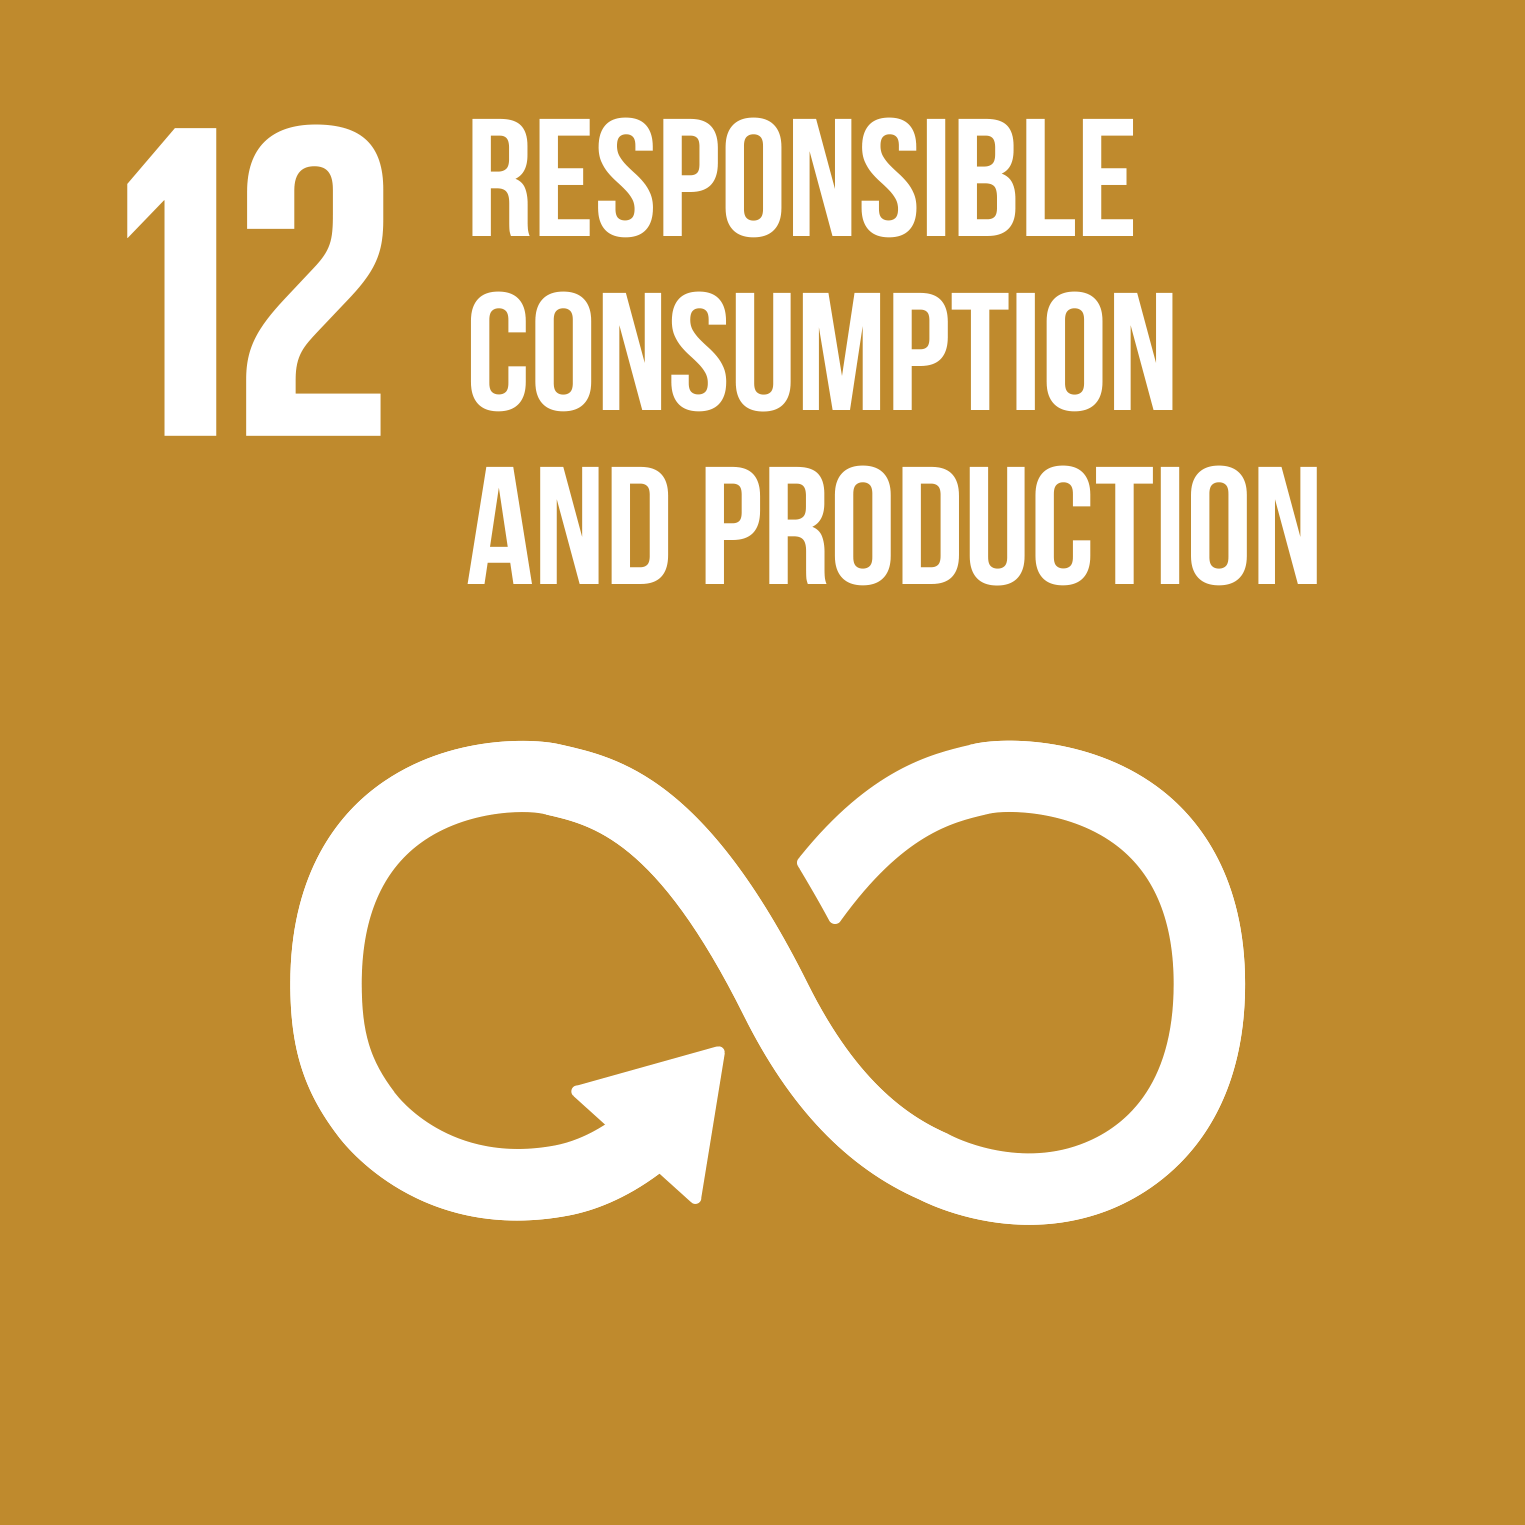 【SDG 12】Responsible Consumption and Production